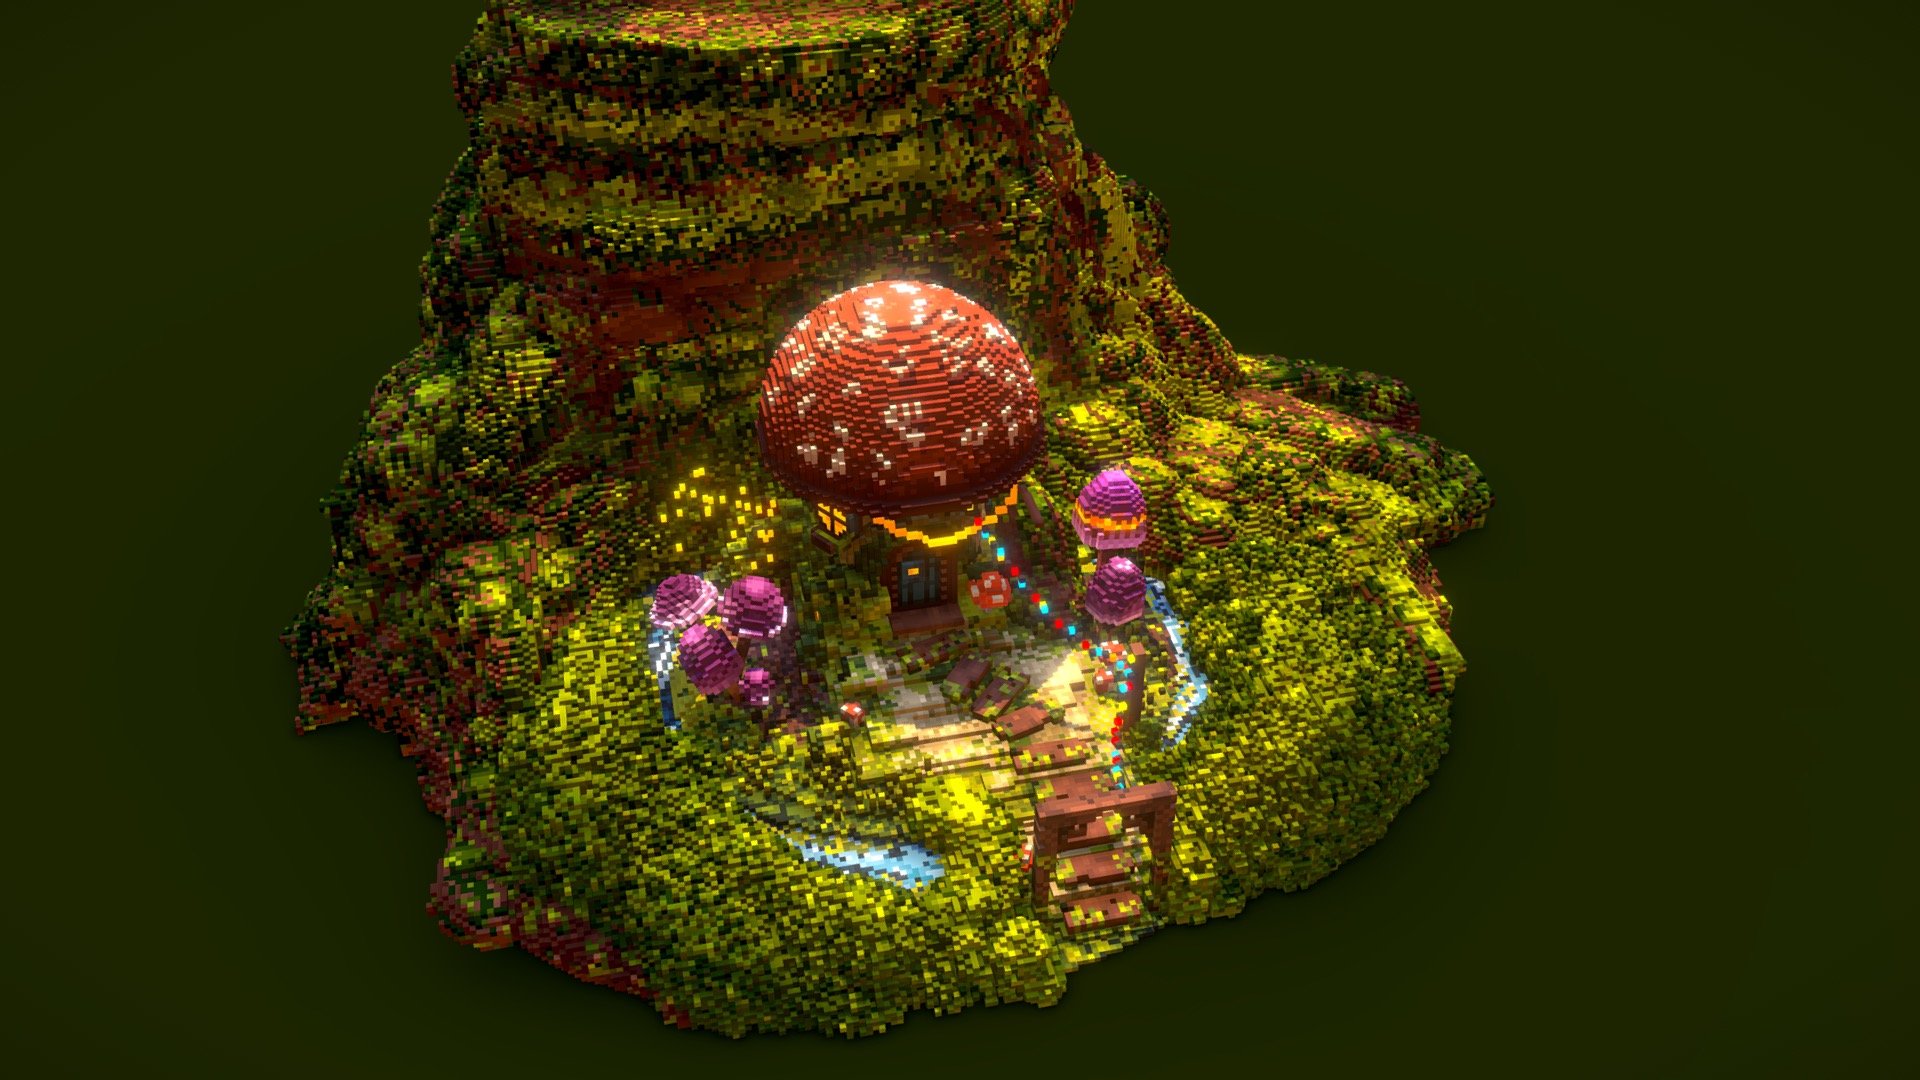 A little voxel gnome enjoys live among nature and its friends. This set piece is made for the &ldquo;getting started video series